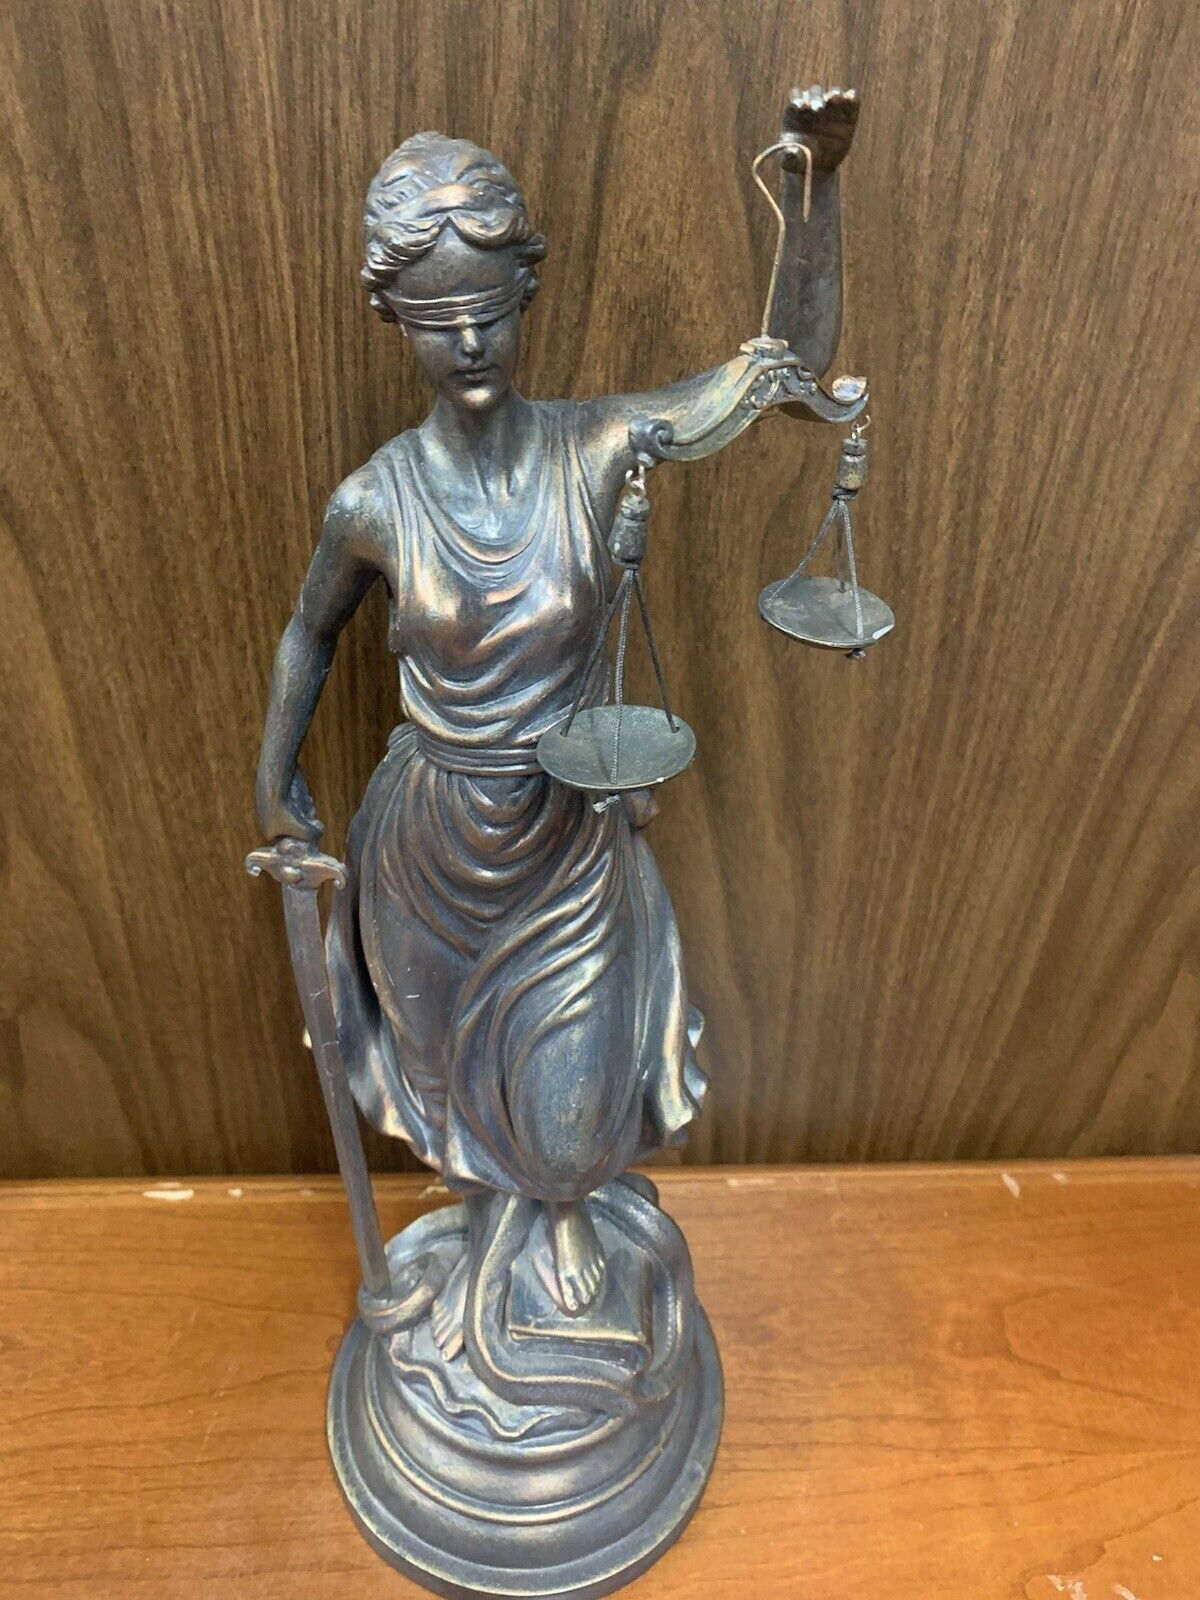 17” Tall Large Antique Blind Lady Justice Statue Themis Goddess Sculpture Deco